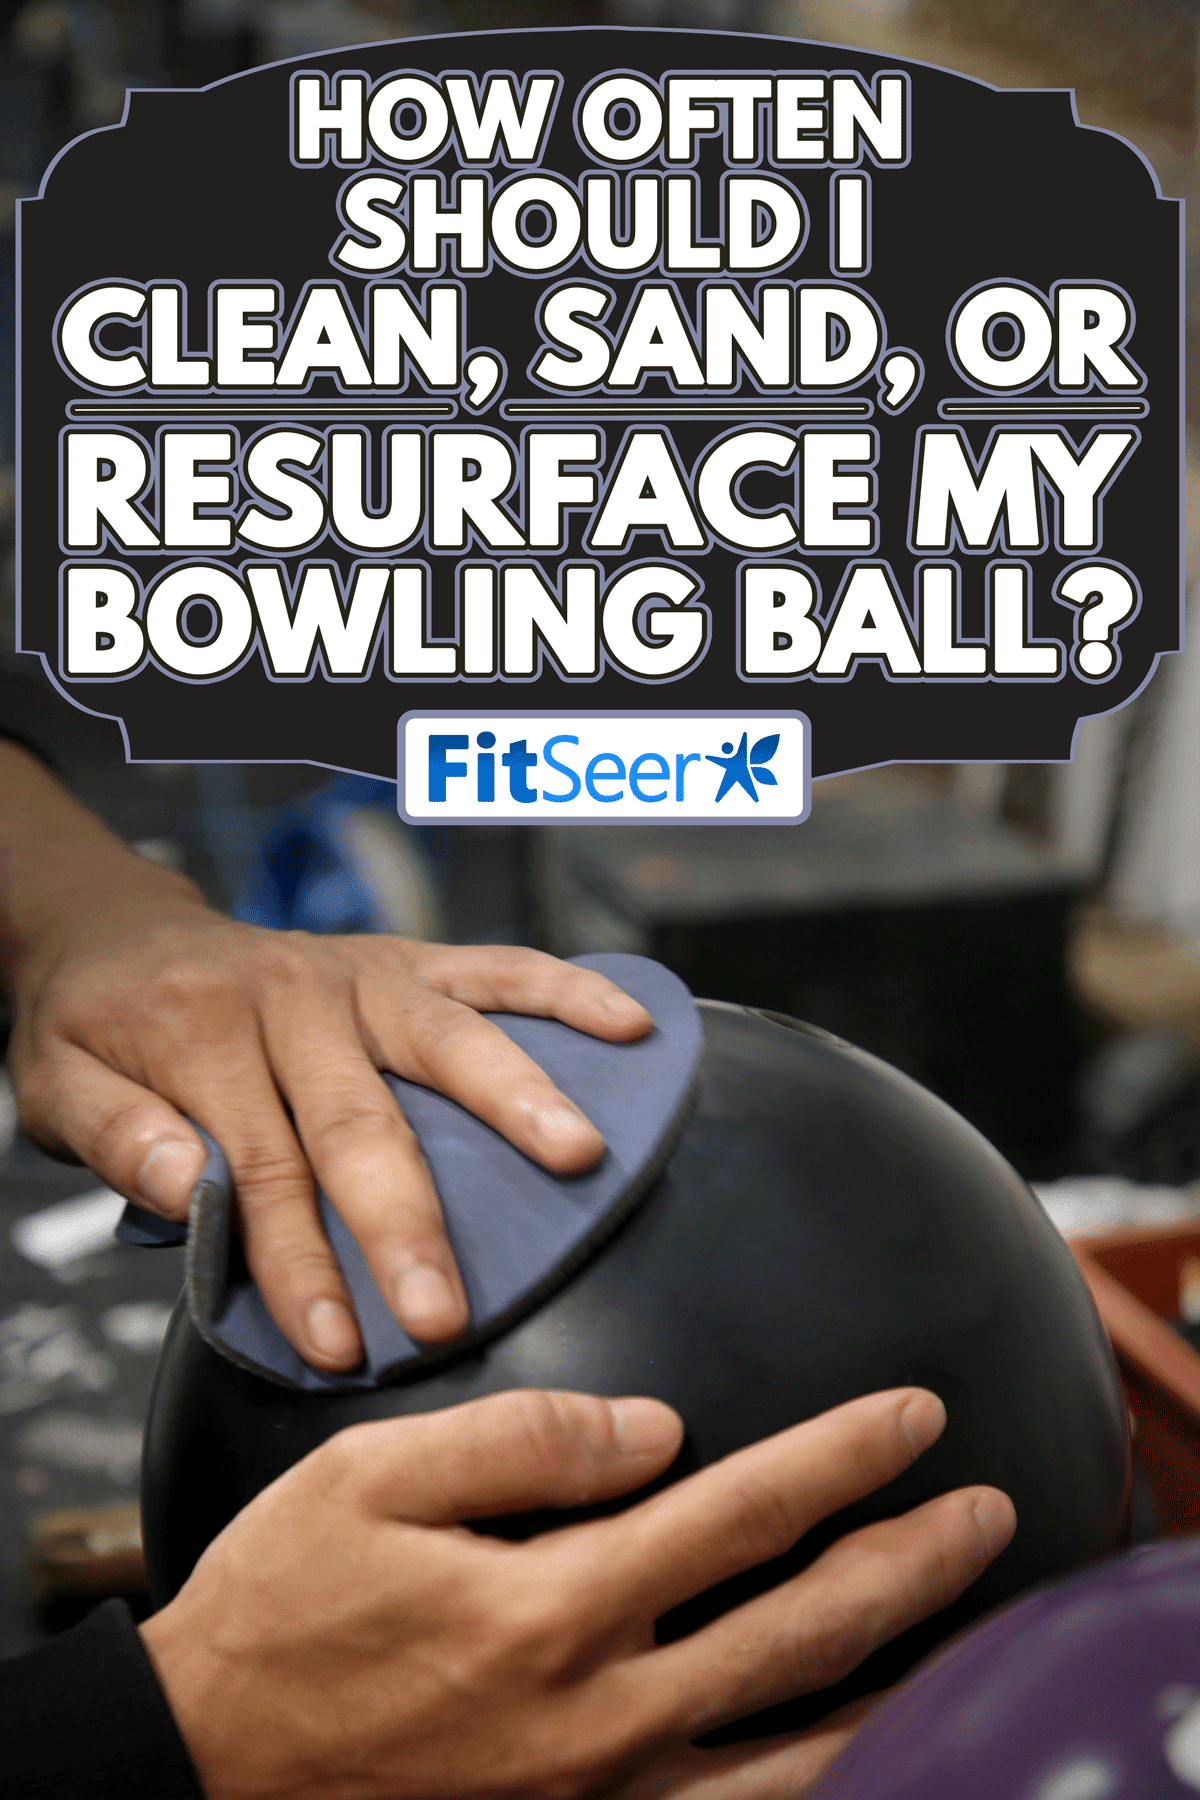 Pair of hands holding a bowling ball and polishing pad for finishing touch, How Often Should I Clean, Sand, Or Resurface My Bowling Ball?